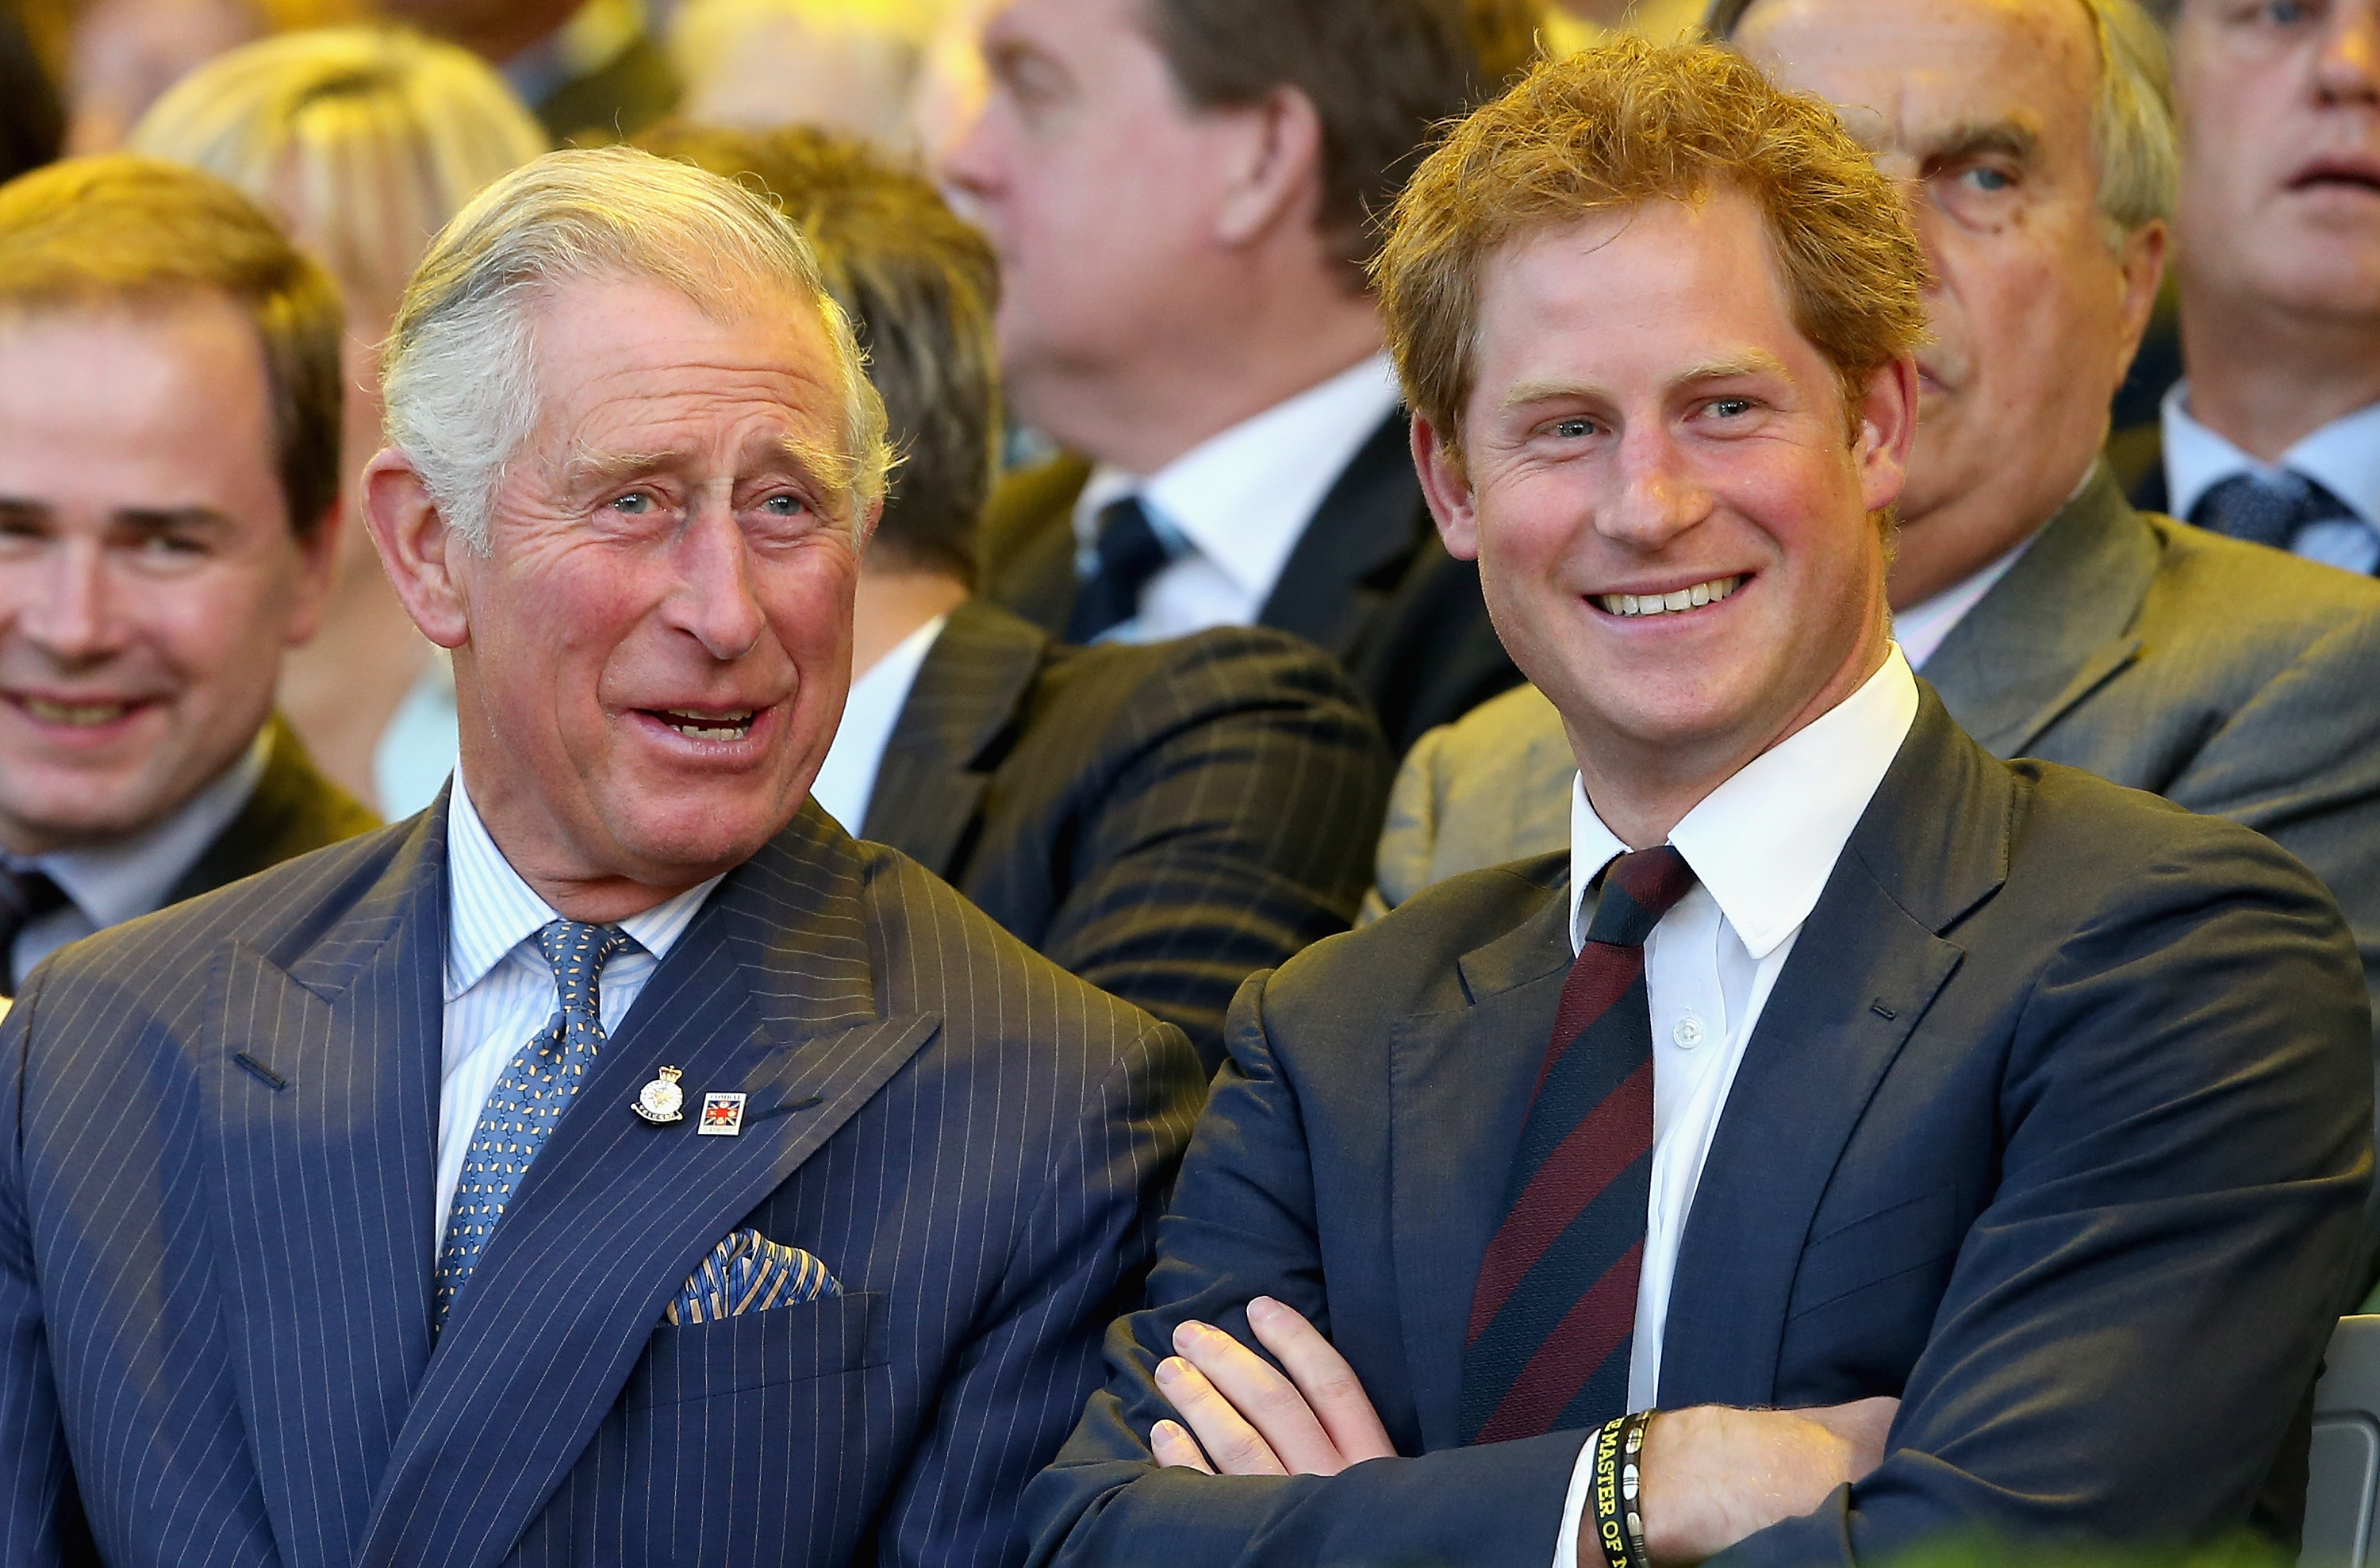 Prince Charles and Prince Harry laugh during the Invictus Games opening ceremony on September 10, 2014 in London, England | Source: Getty Images